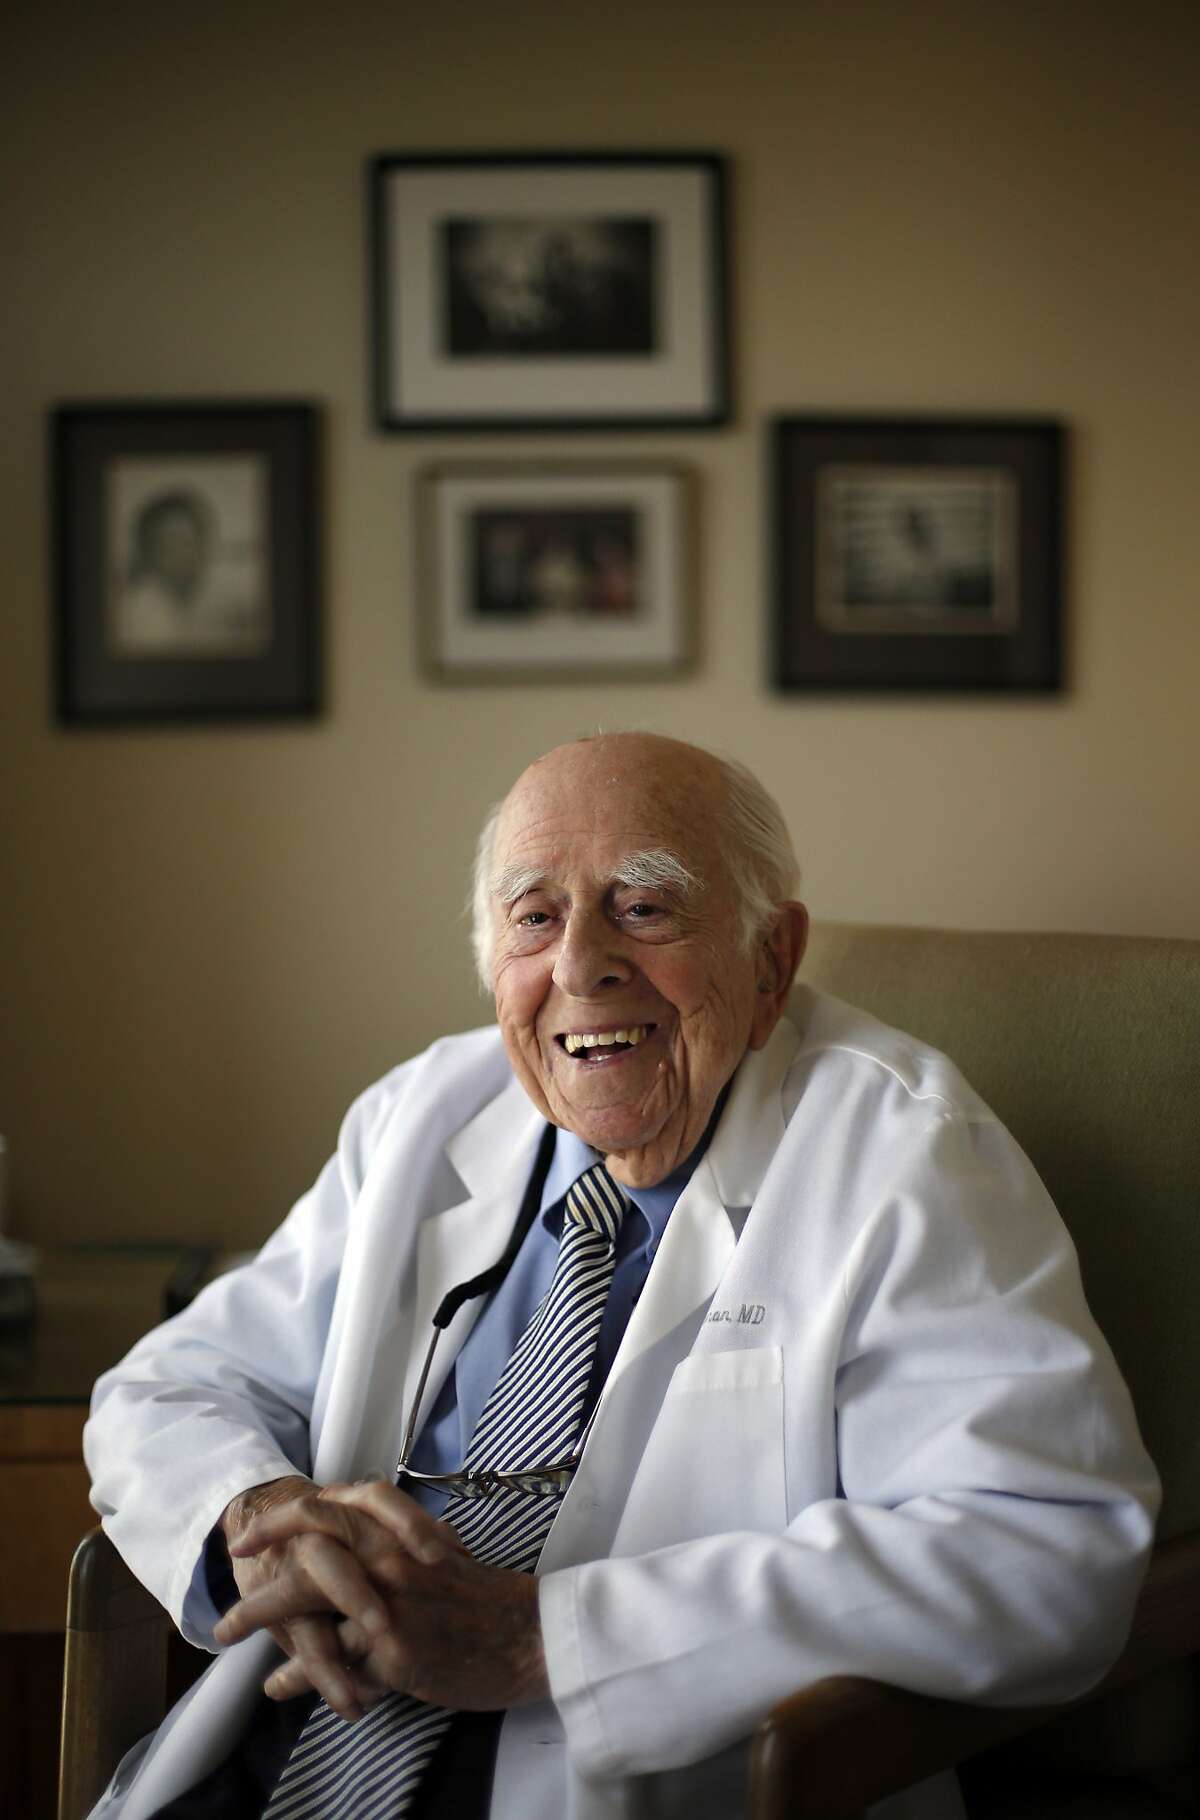 Dr. Ephraim Engleman turns 103 on March 24. He has written a book called "My Century" and still comes in to work at UCSF. Shown here at his office in San Francisco, Calif., on Tuesday, February 25, 2014, Dr. Engleman will be honored by the department of medicine by having the center named after him to "The Rosalind Russell-Ephraim P. Engleman Medical Research Center for Arthritis."Dr. Ephraim Engleman turns 103 on March 24. He has written a book called "My Century" and still comes in to work at UCSF. Shown here at his office in San Francisco, Calif., on Tuesday, February 25, 2014, Dr. Engleman will be honored by the department of medicine by having the center named after him to "The Rosalind Russell-Ephraim P. Engleman Medical Research Center for Arthritis."